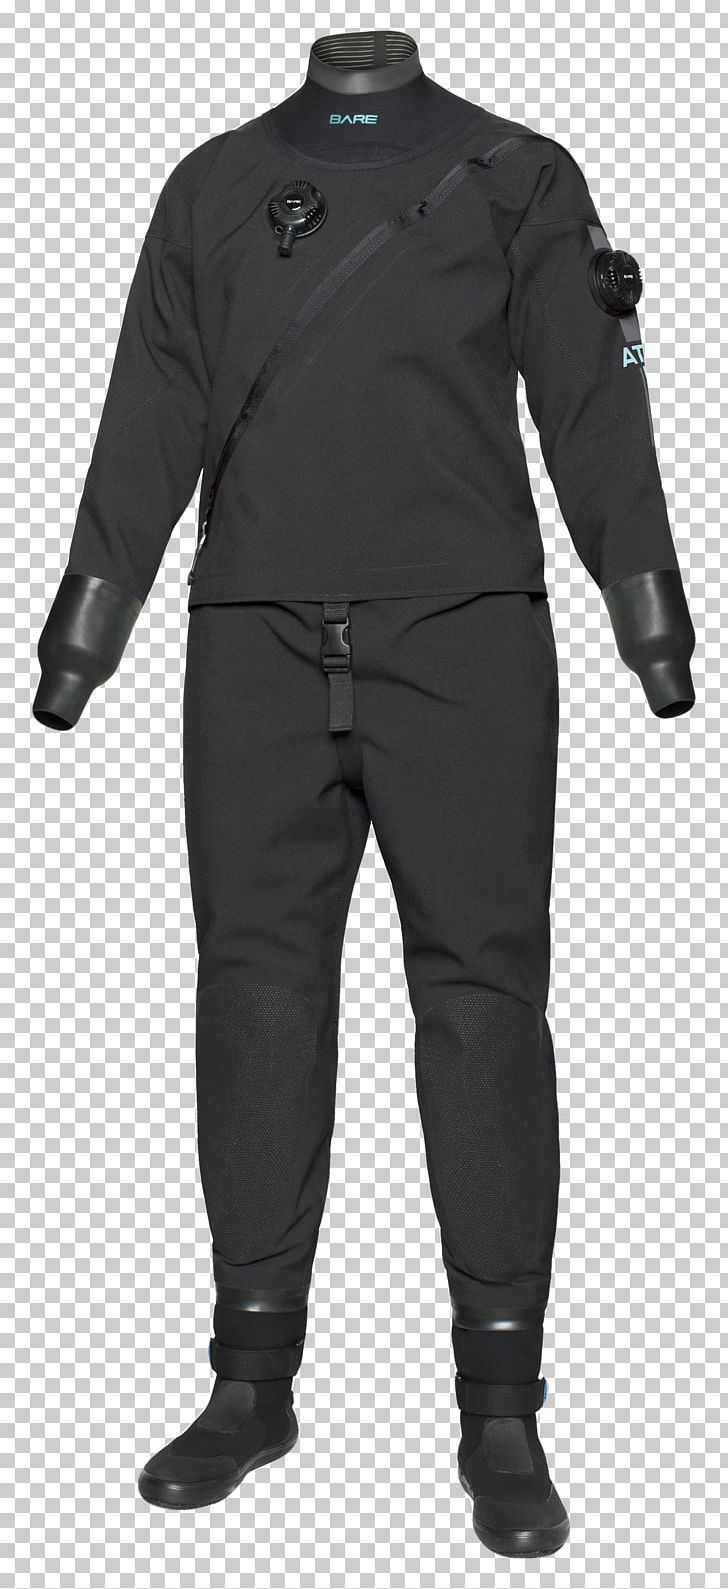 Dry Suit Underwater Diving Scuba Diving Wetsuit PNG, Clipart, Bare, Braces, Clothing, Diving, Diving Equipment Free PNG Download